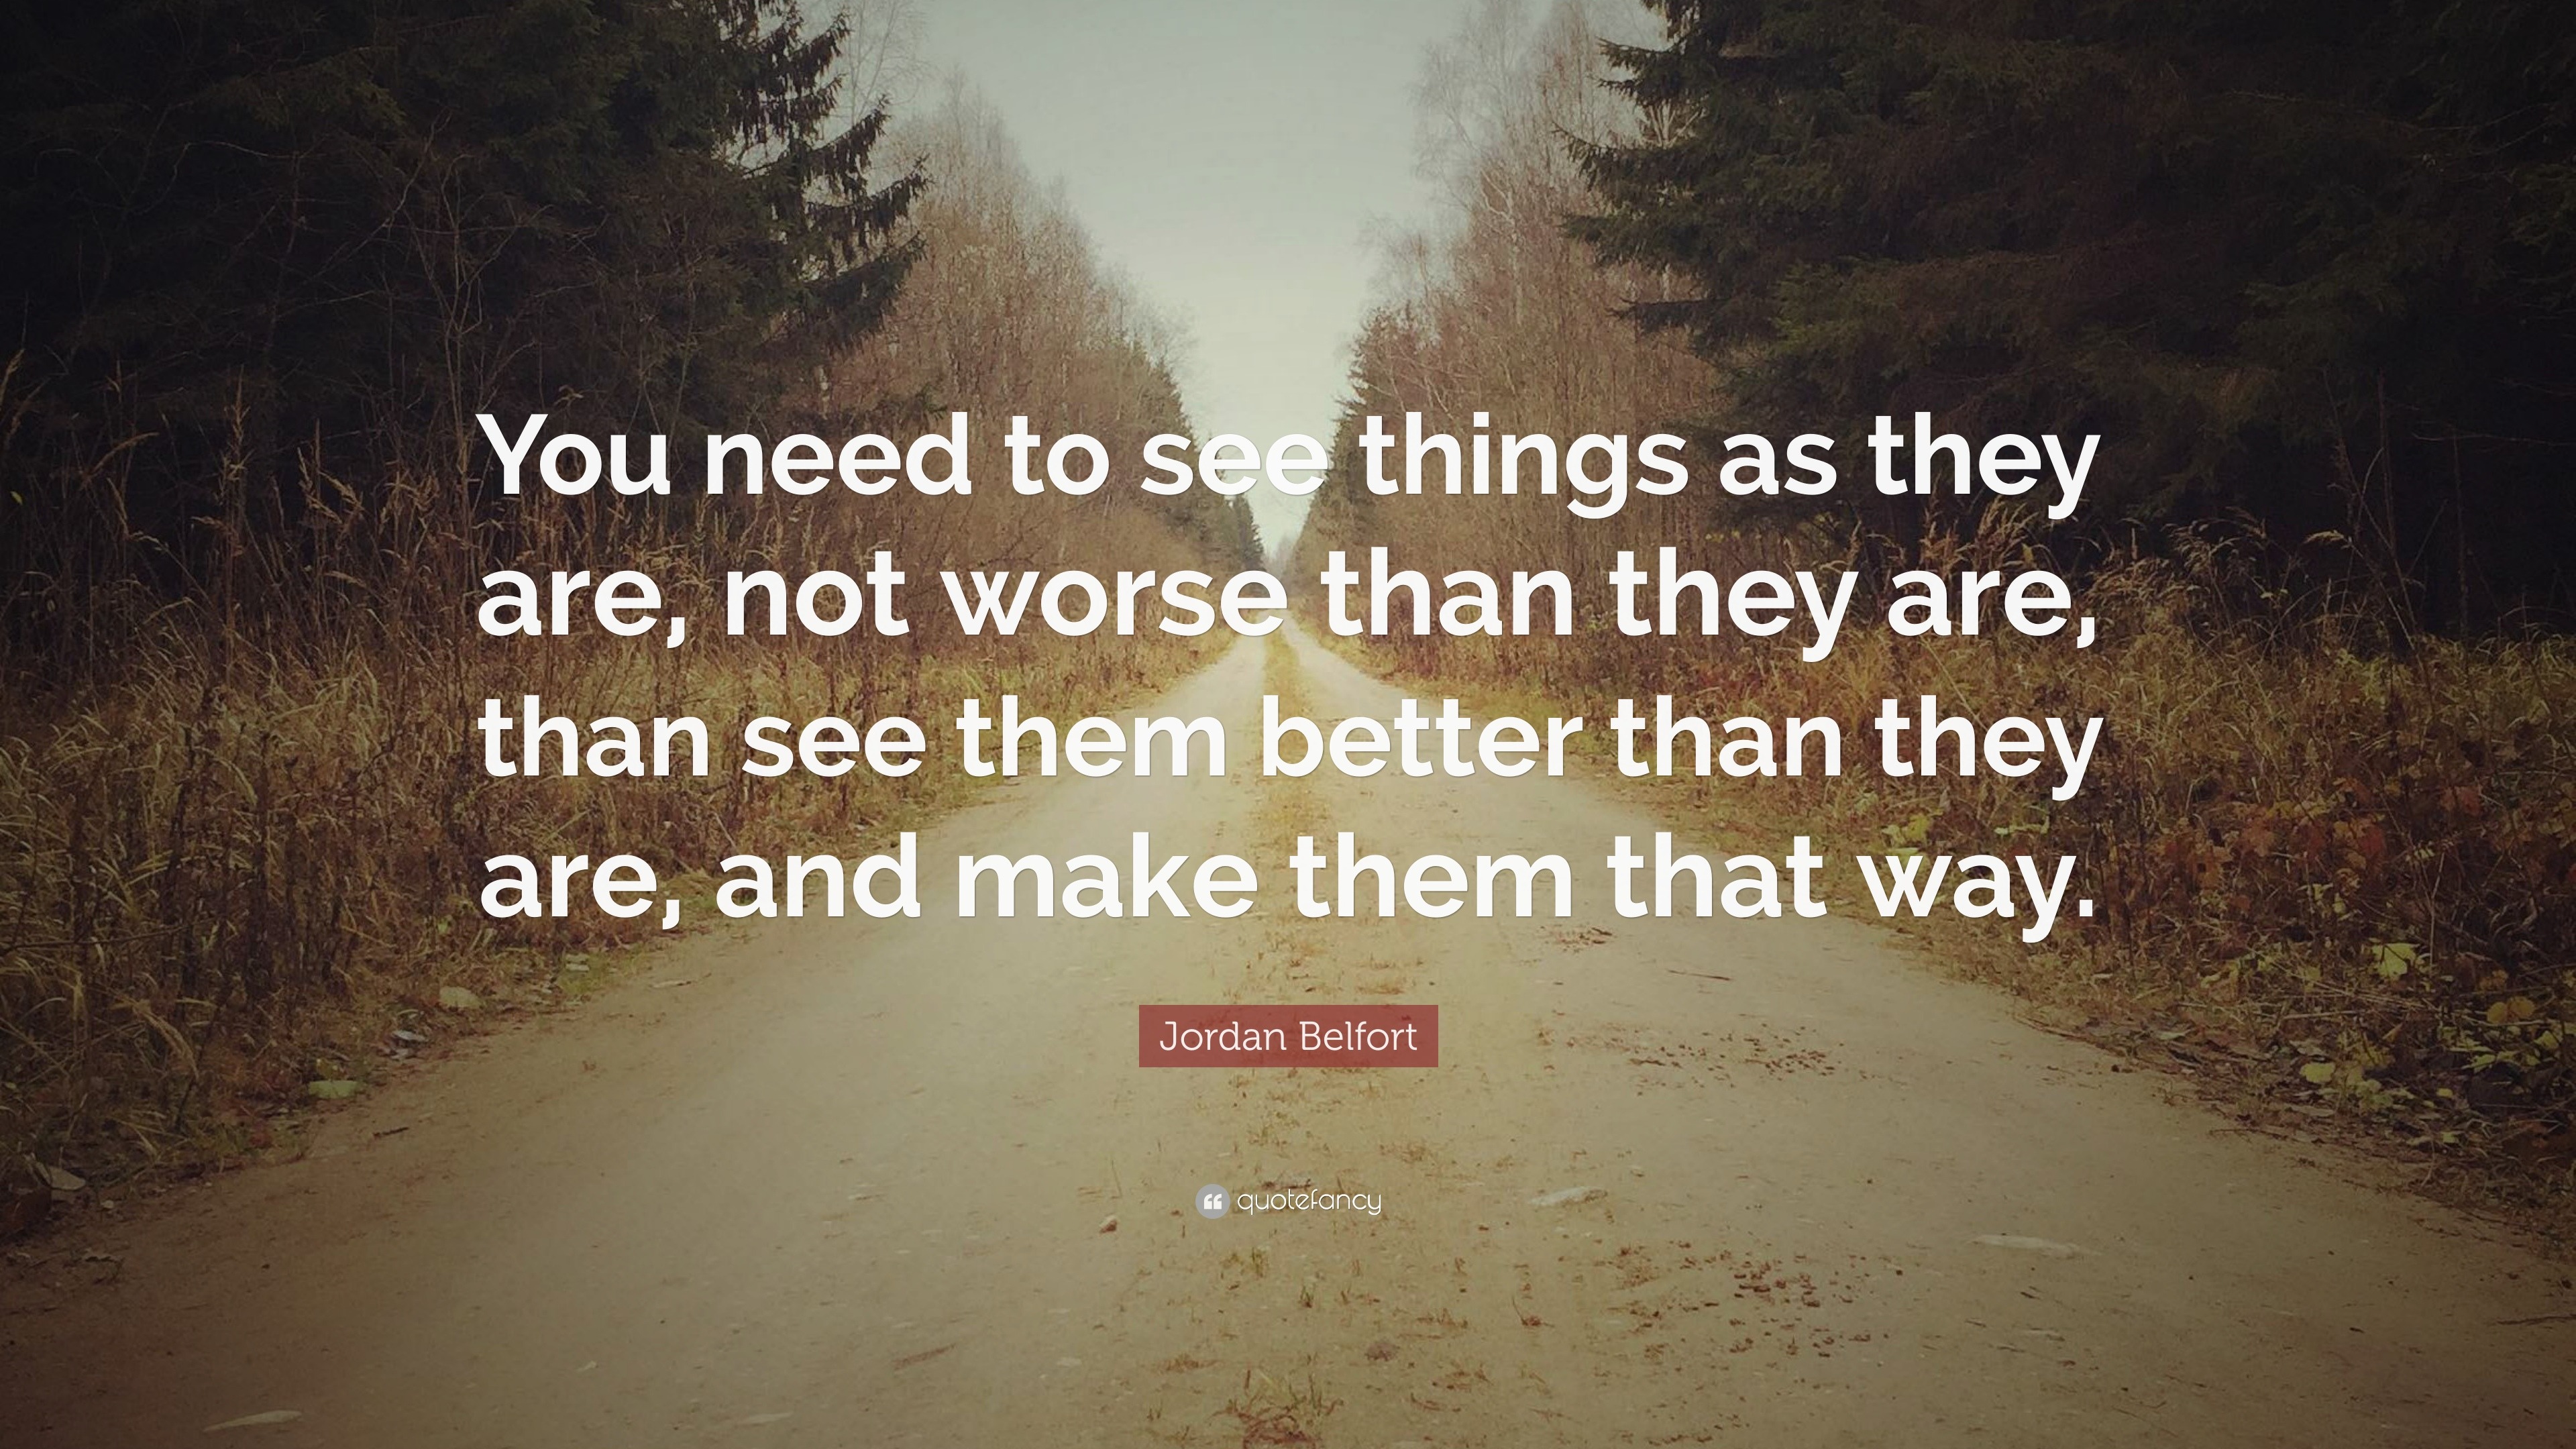 Jordan Belfort Quote: “You need to see things as they are, not worse ...